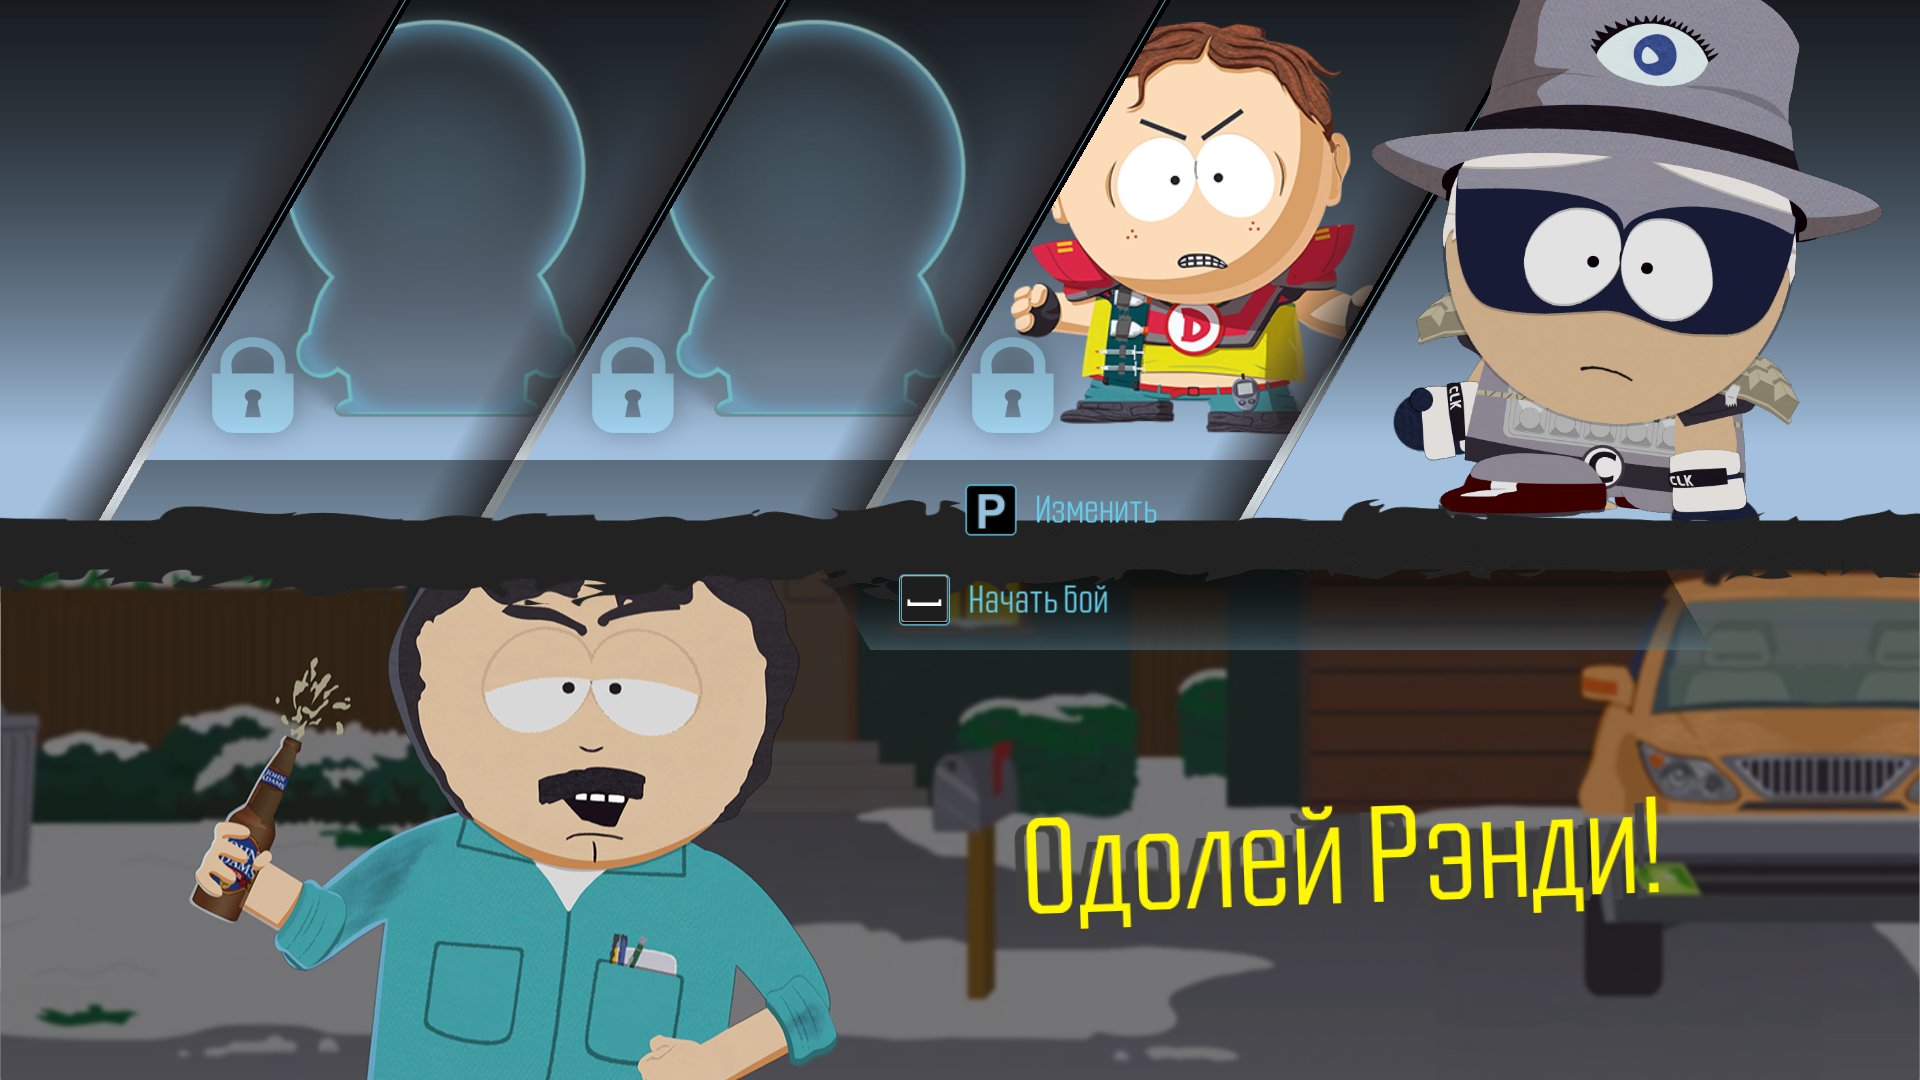 South park the fractured but whole купить ключ steam дешево фото 43